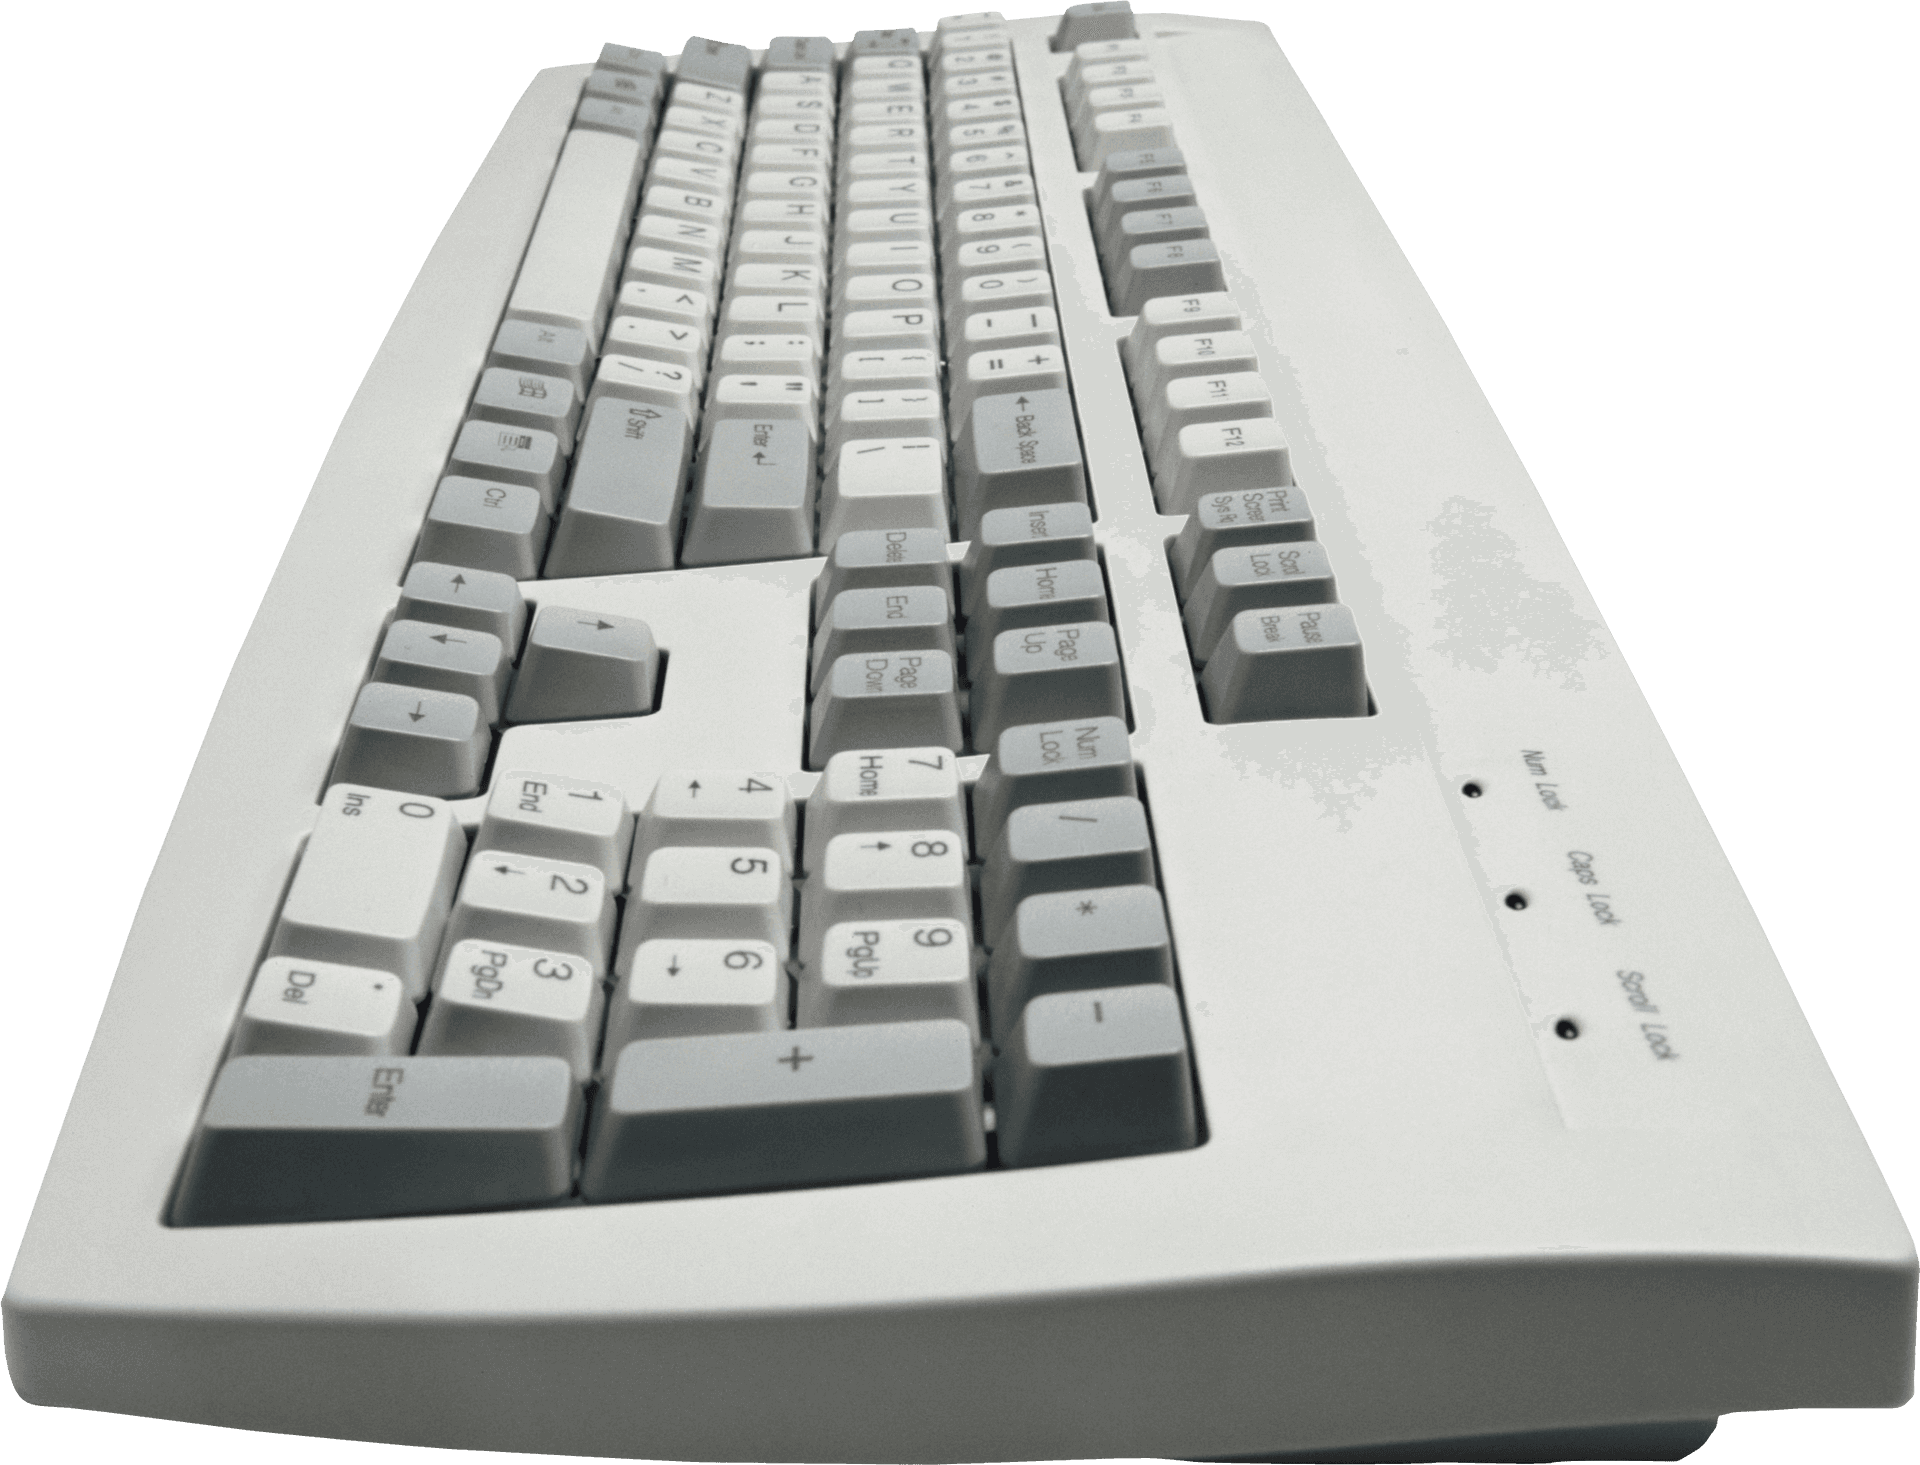 White Mechanical Keyboard Perspective View PNG image